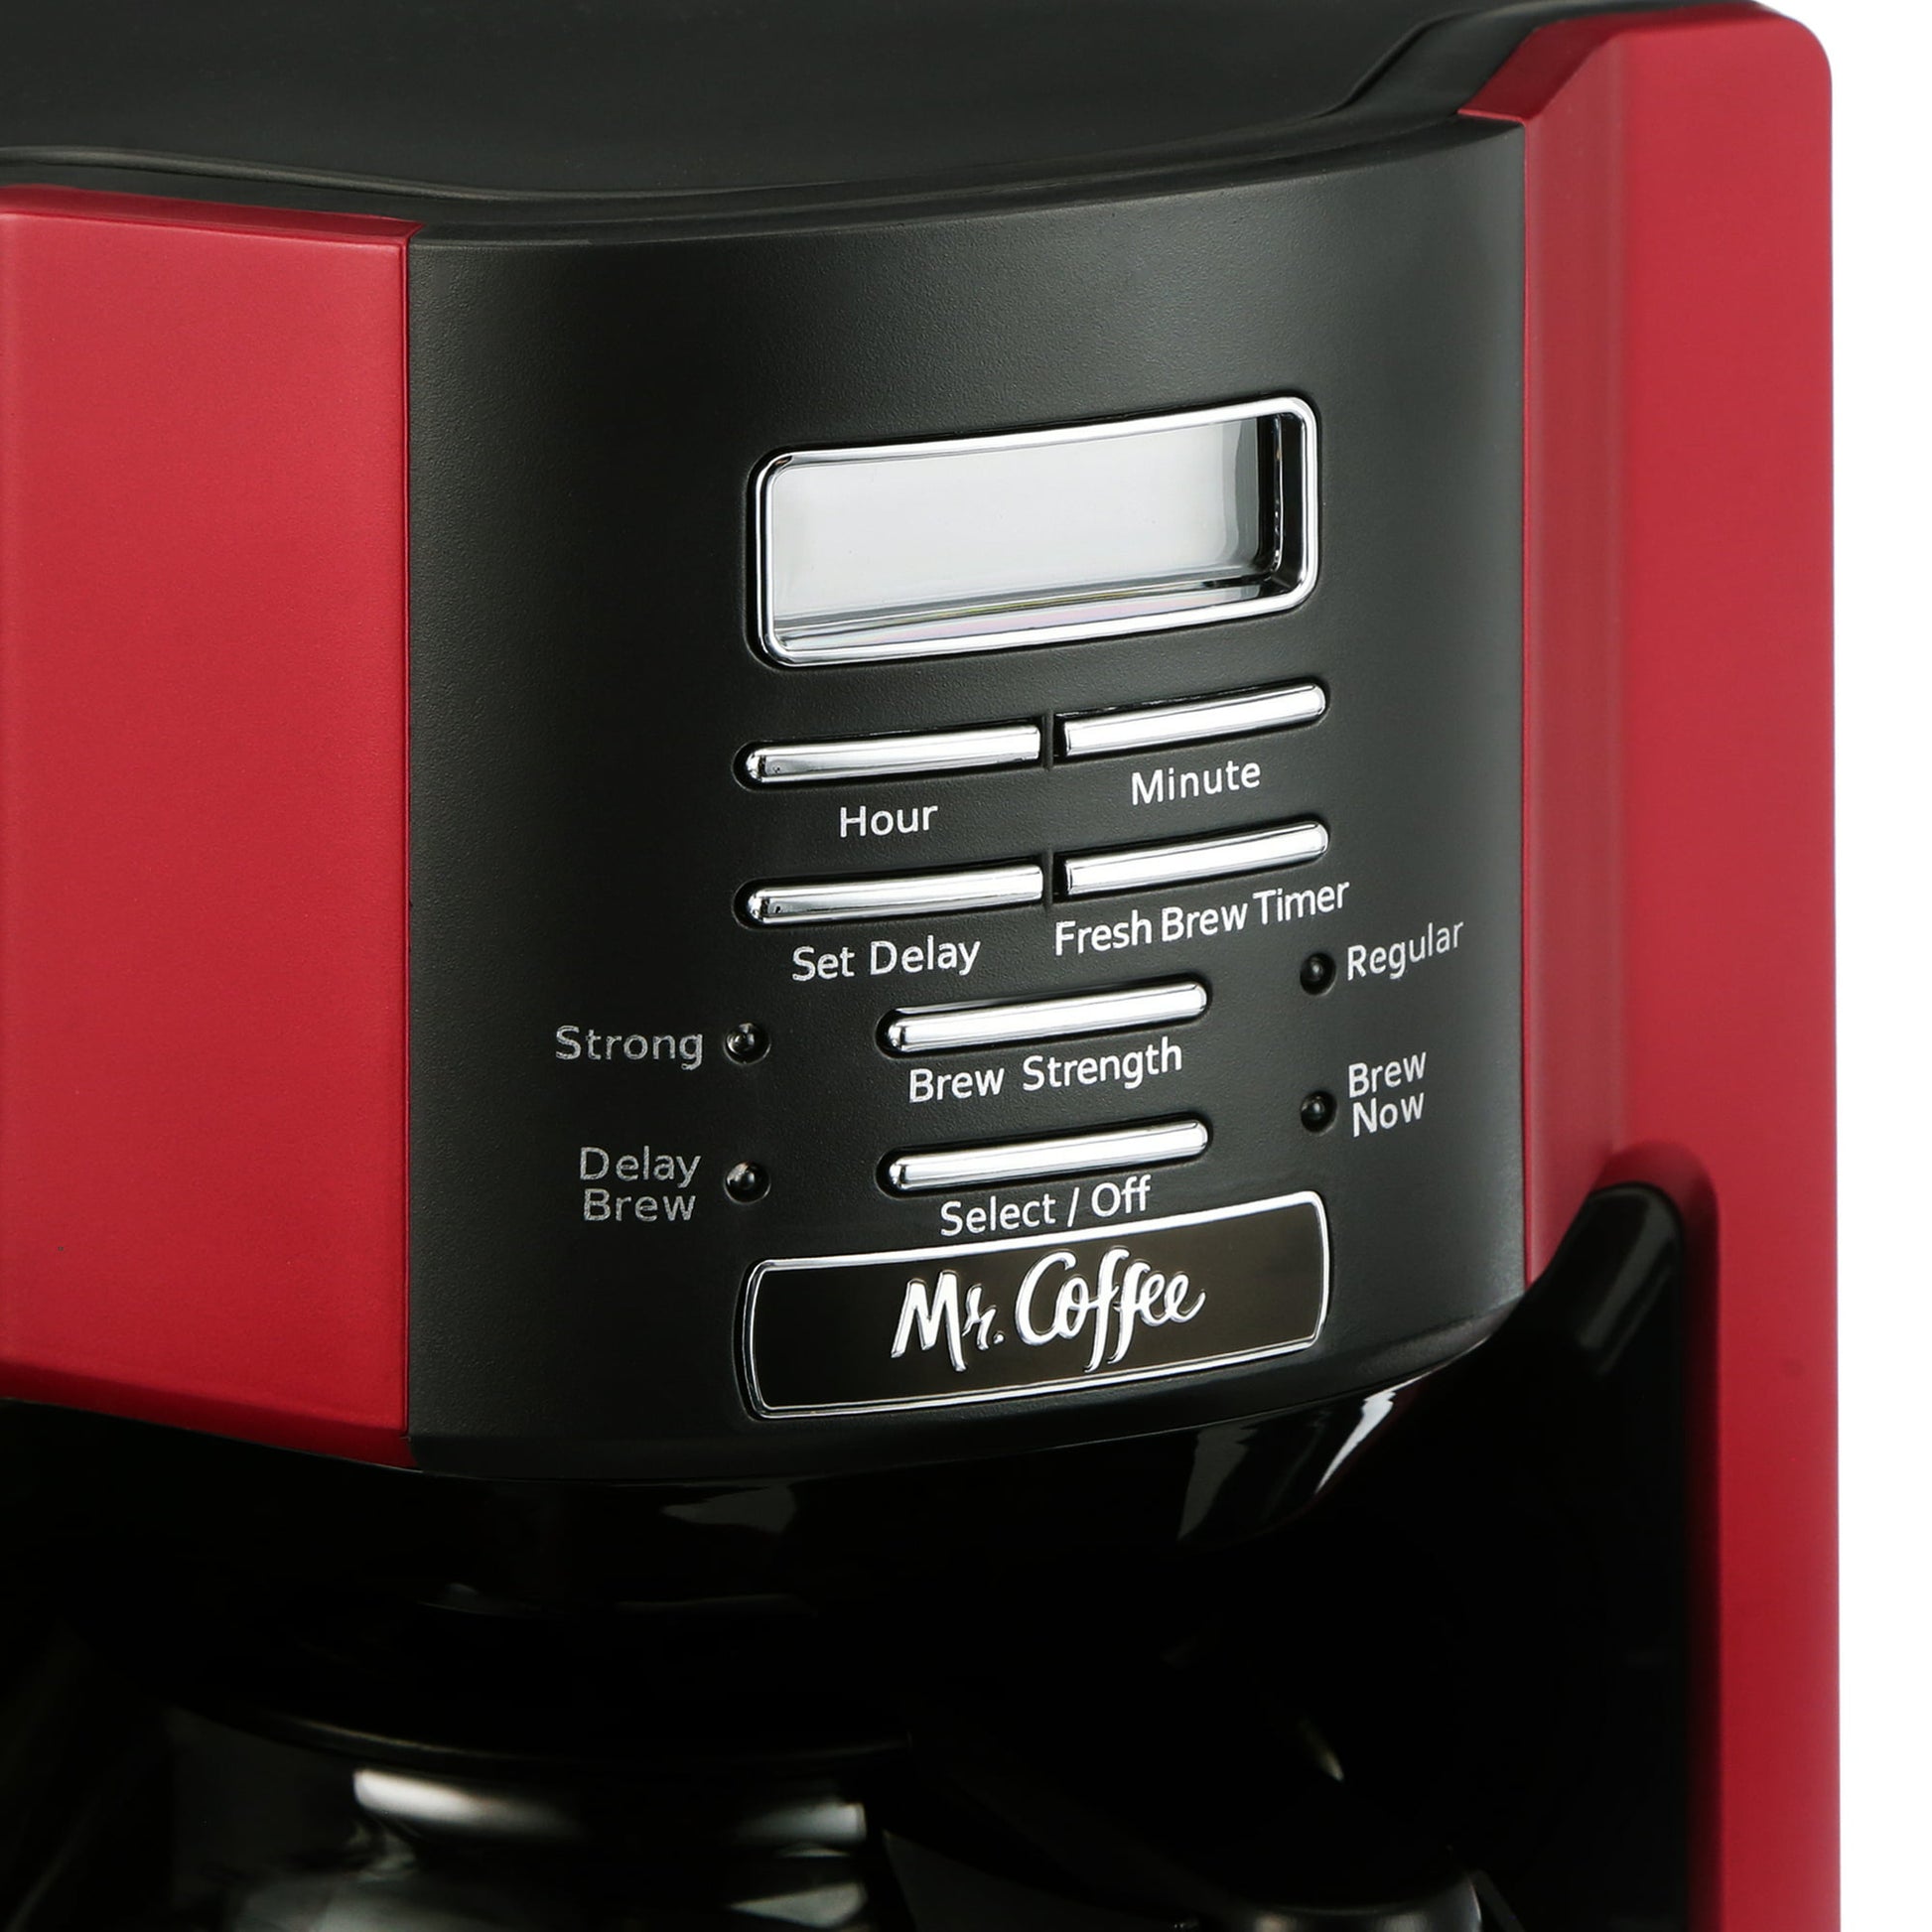 Mr. Coffee 12 Cup Programmable Coffeemaker Automatic Cleaning